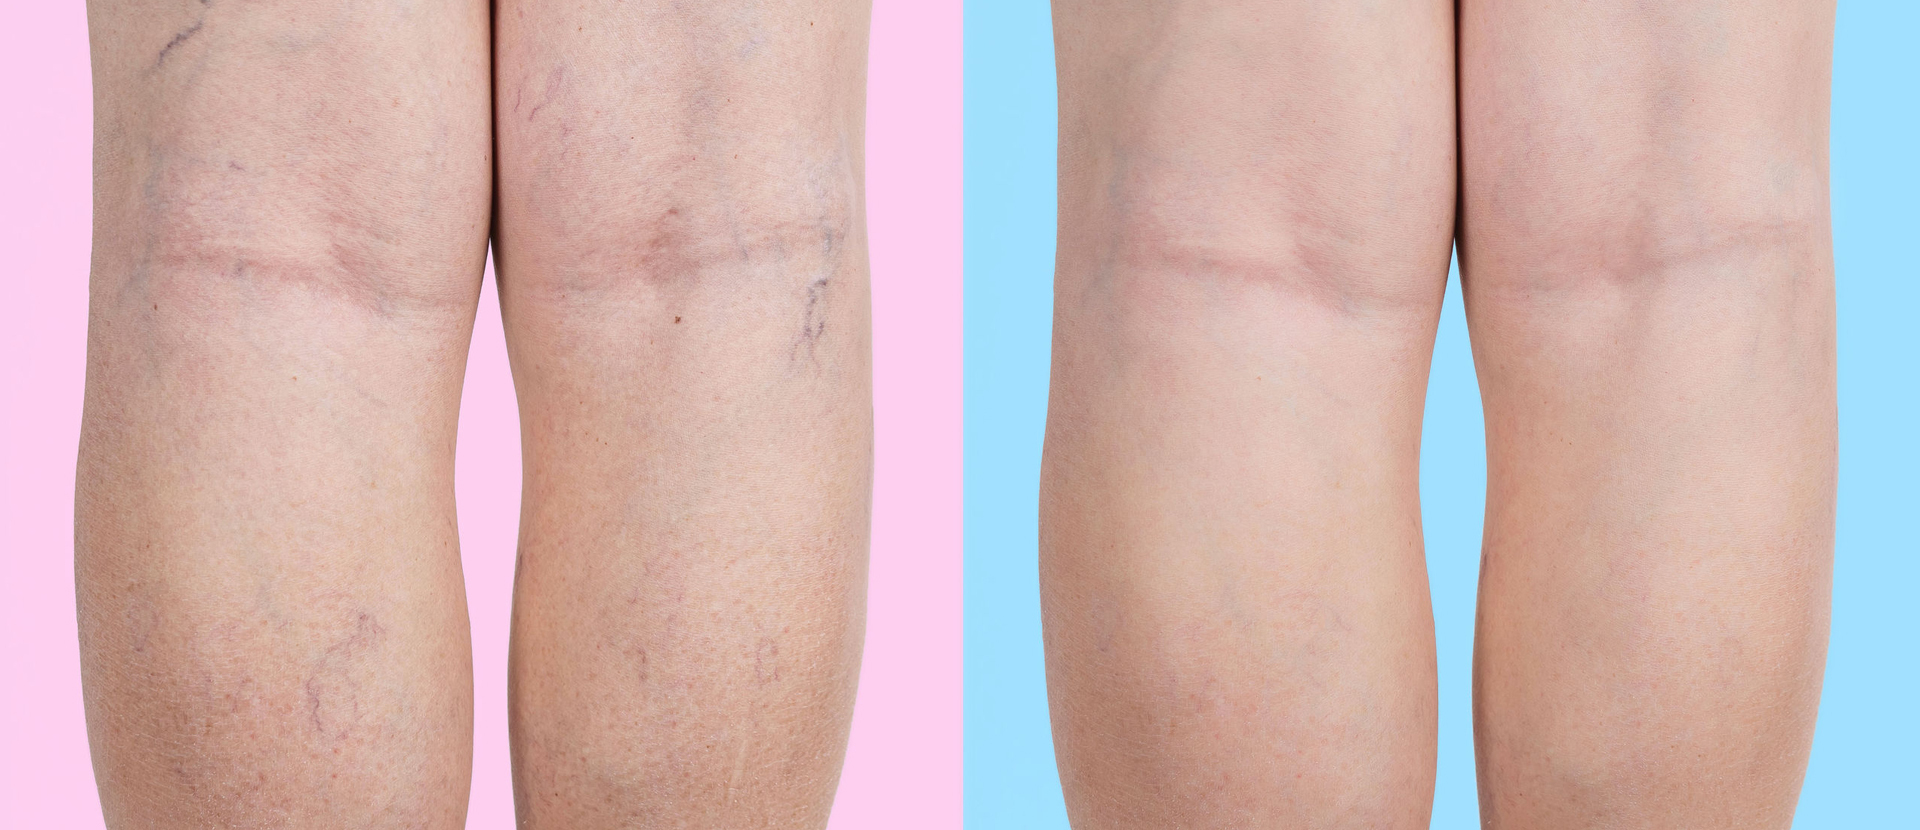 Thread Veins before and after treatment